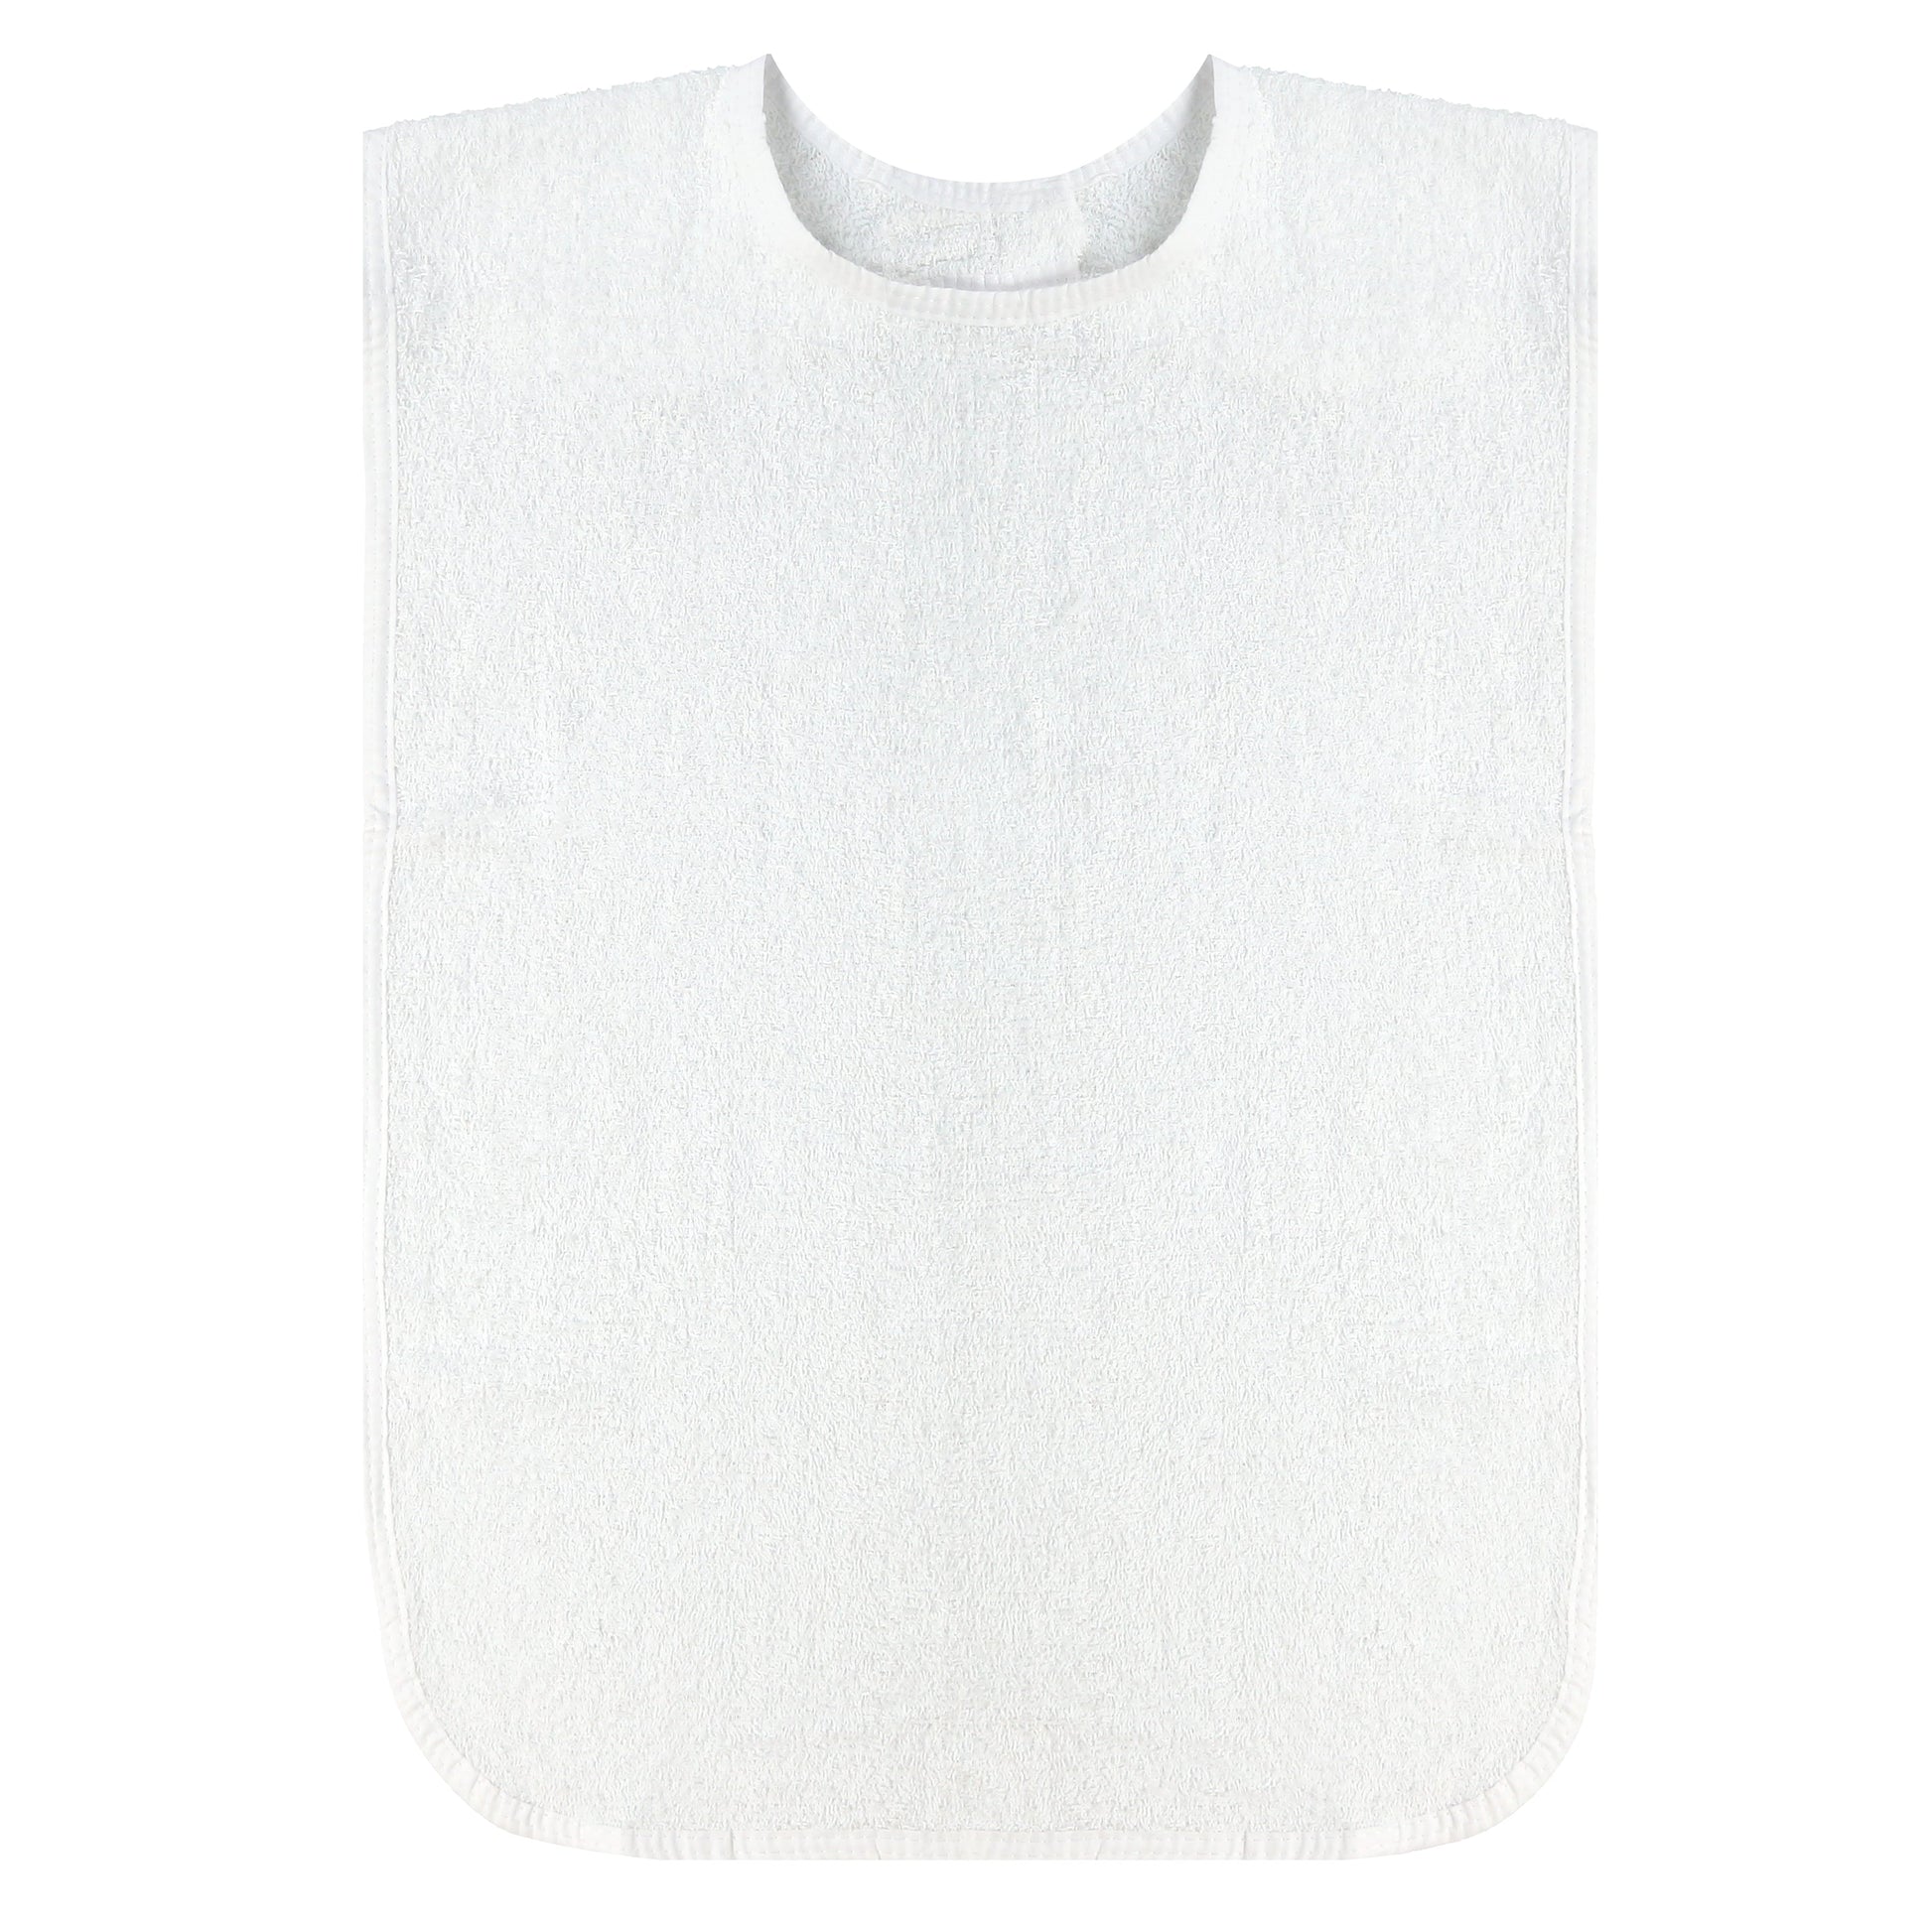 American Dawn | 18X32 Inch White With Velcro Closure Clothing Protector